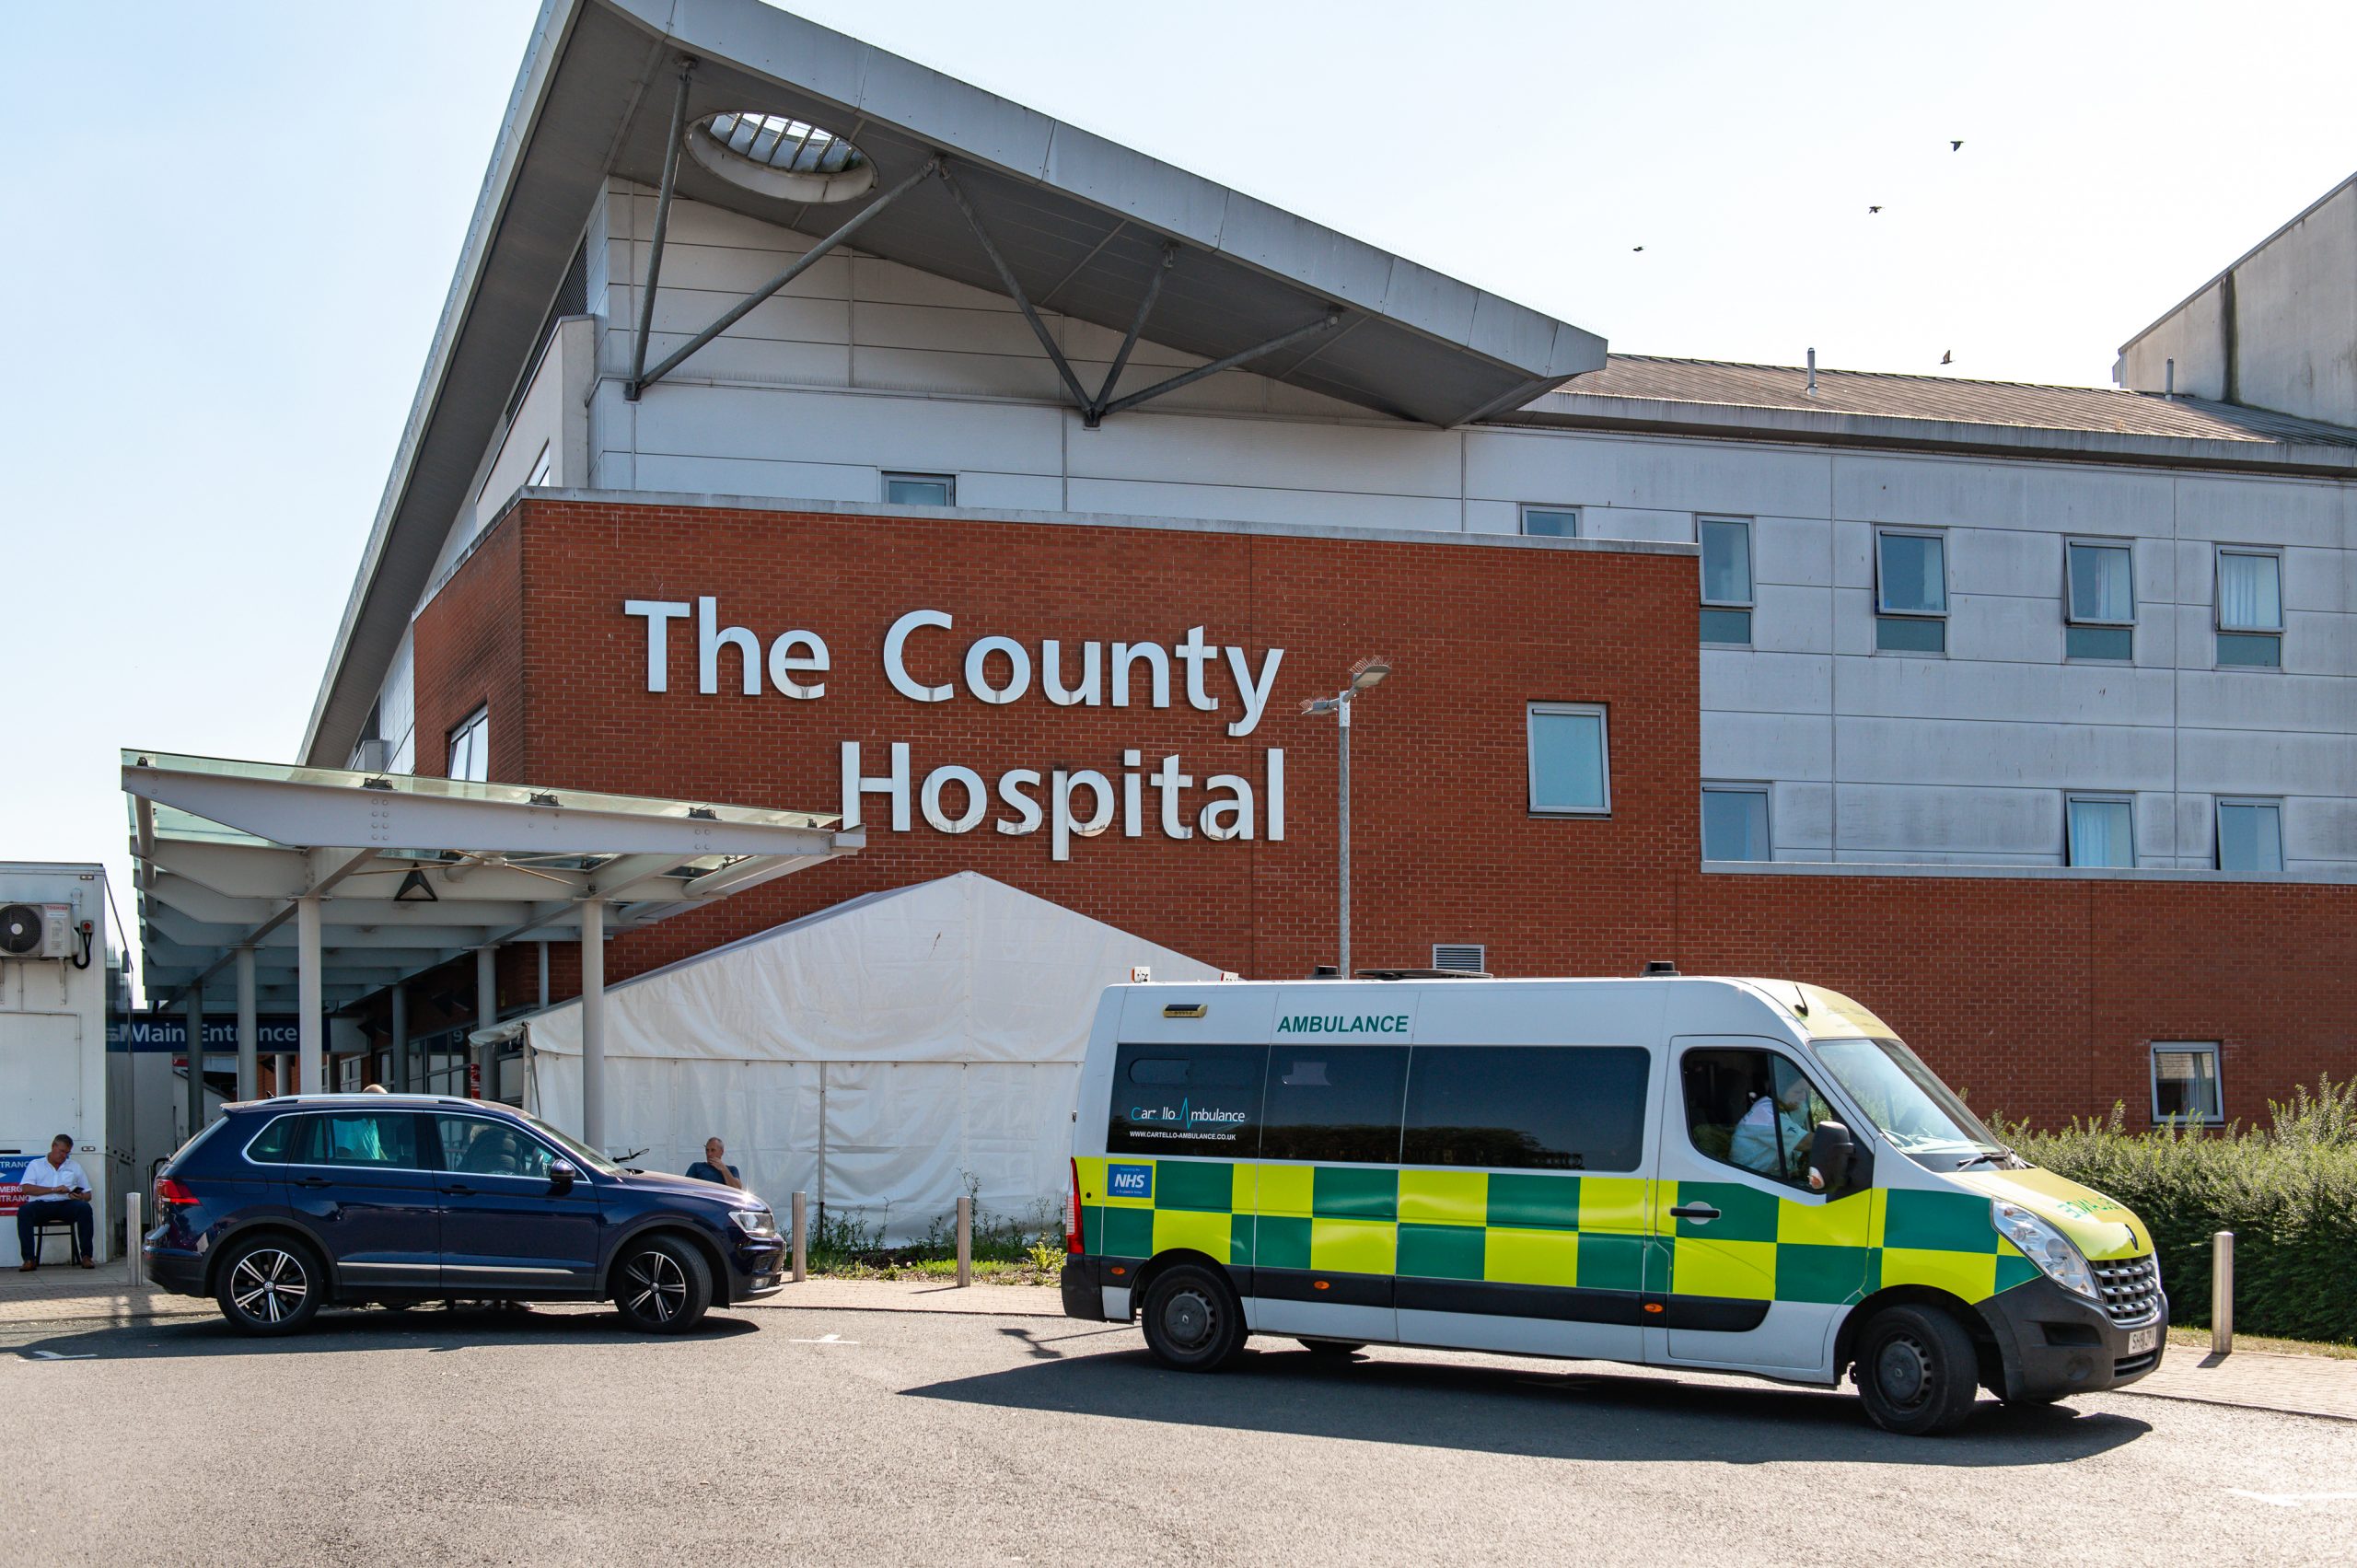 NEWS | Number of patients with COVID-19 at hospital in Herefordshire rises to 20